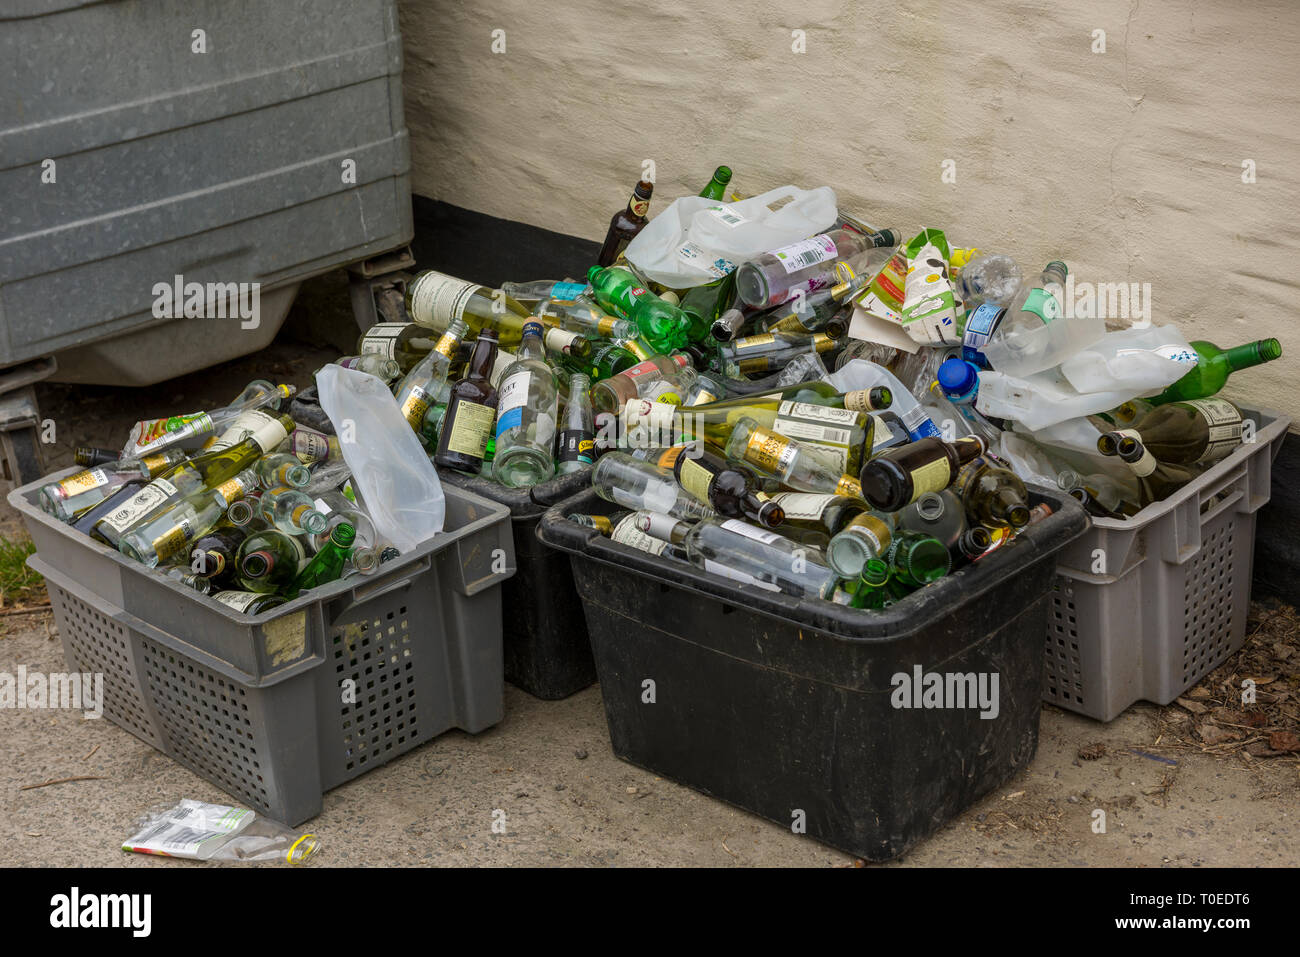 Overflowing recycling boxes containing plastic and glass bottles. Stock Photo